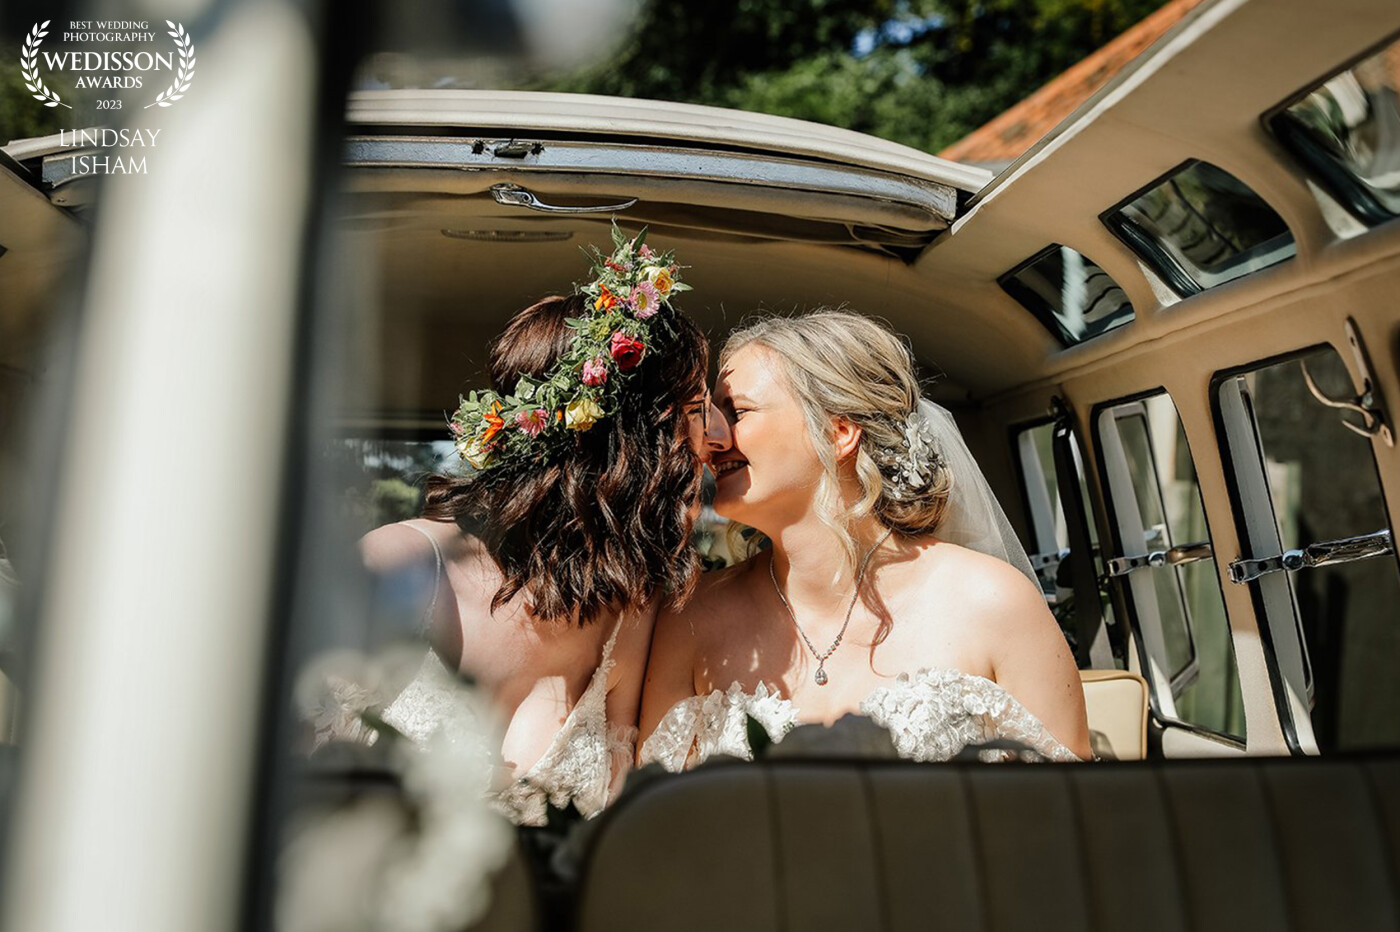 That just married feeling!  These two lovely ladies were having some quiet time, as literally a few minutes before this beautiful moment was taken, they had said their "I do's" under the rustic beams of the stunning barn at Elsham Hall.